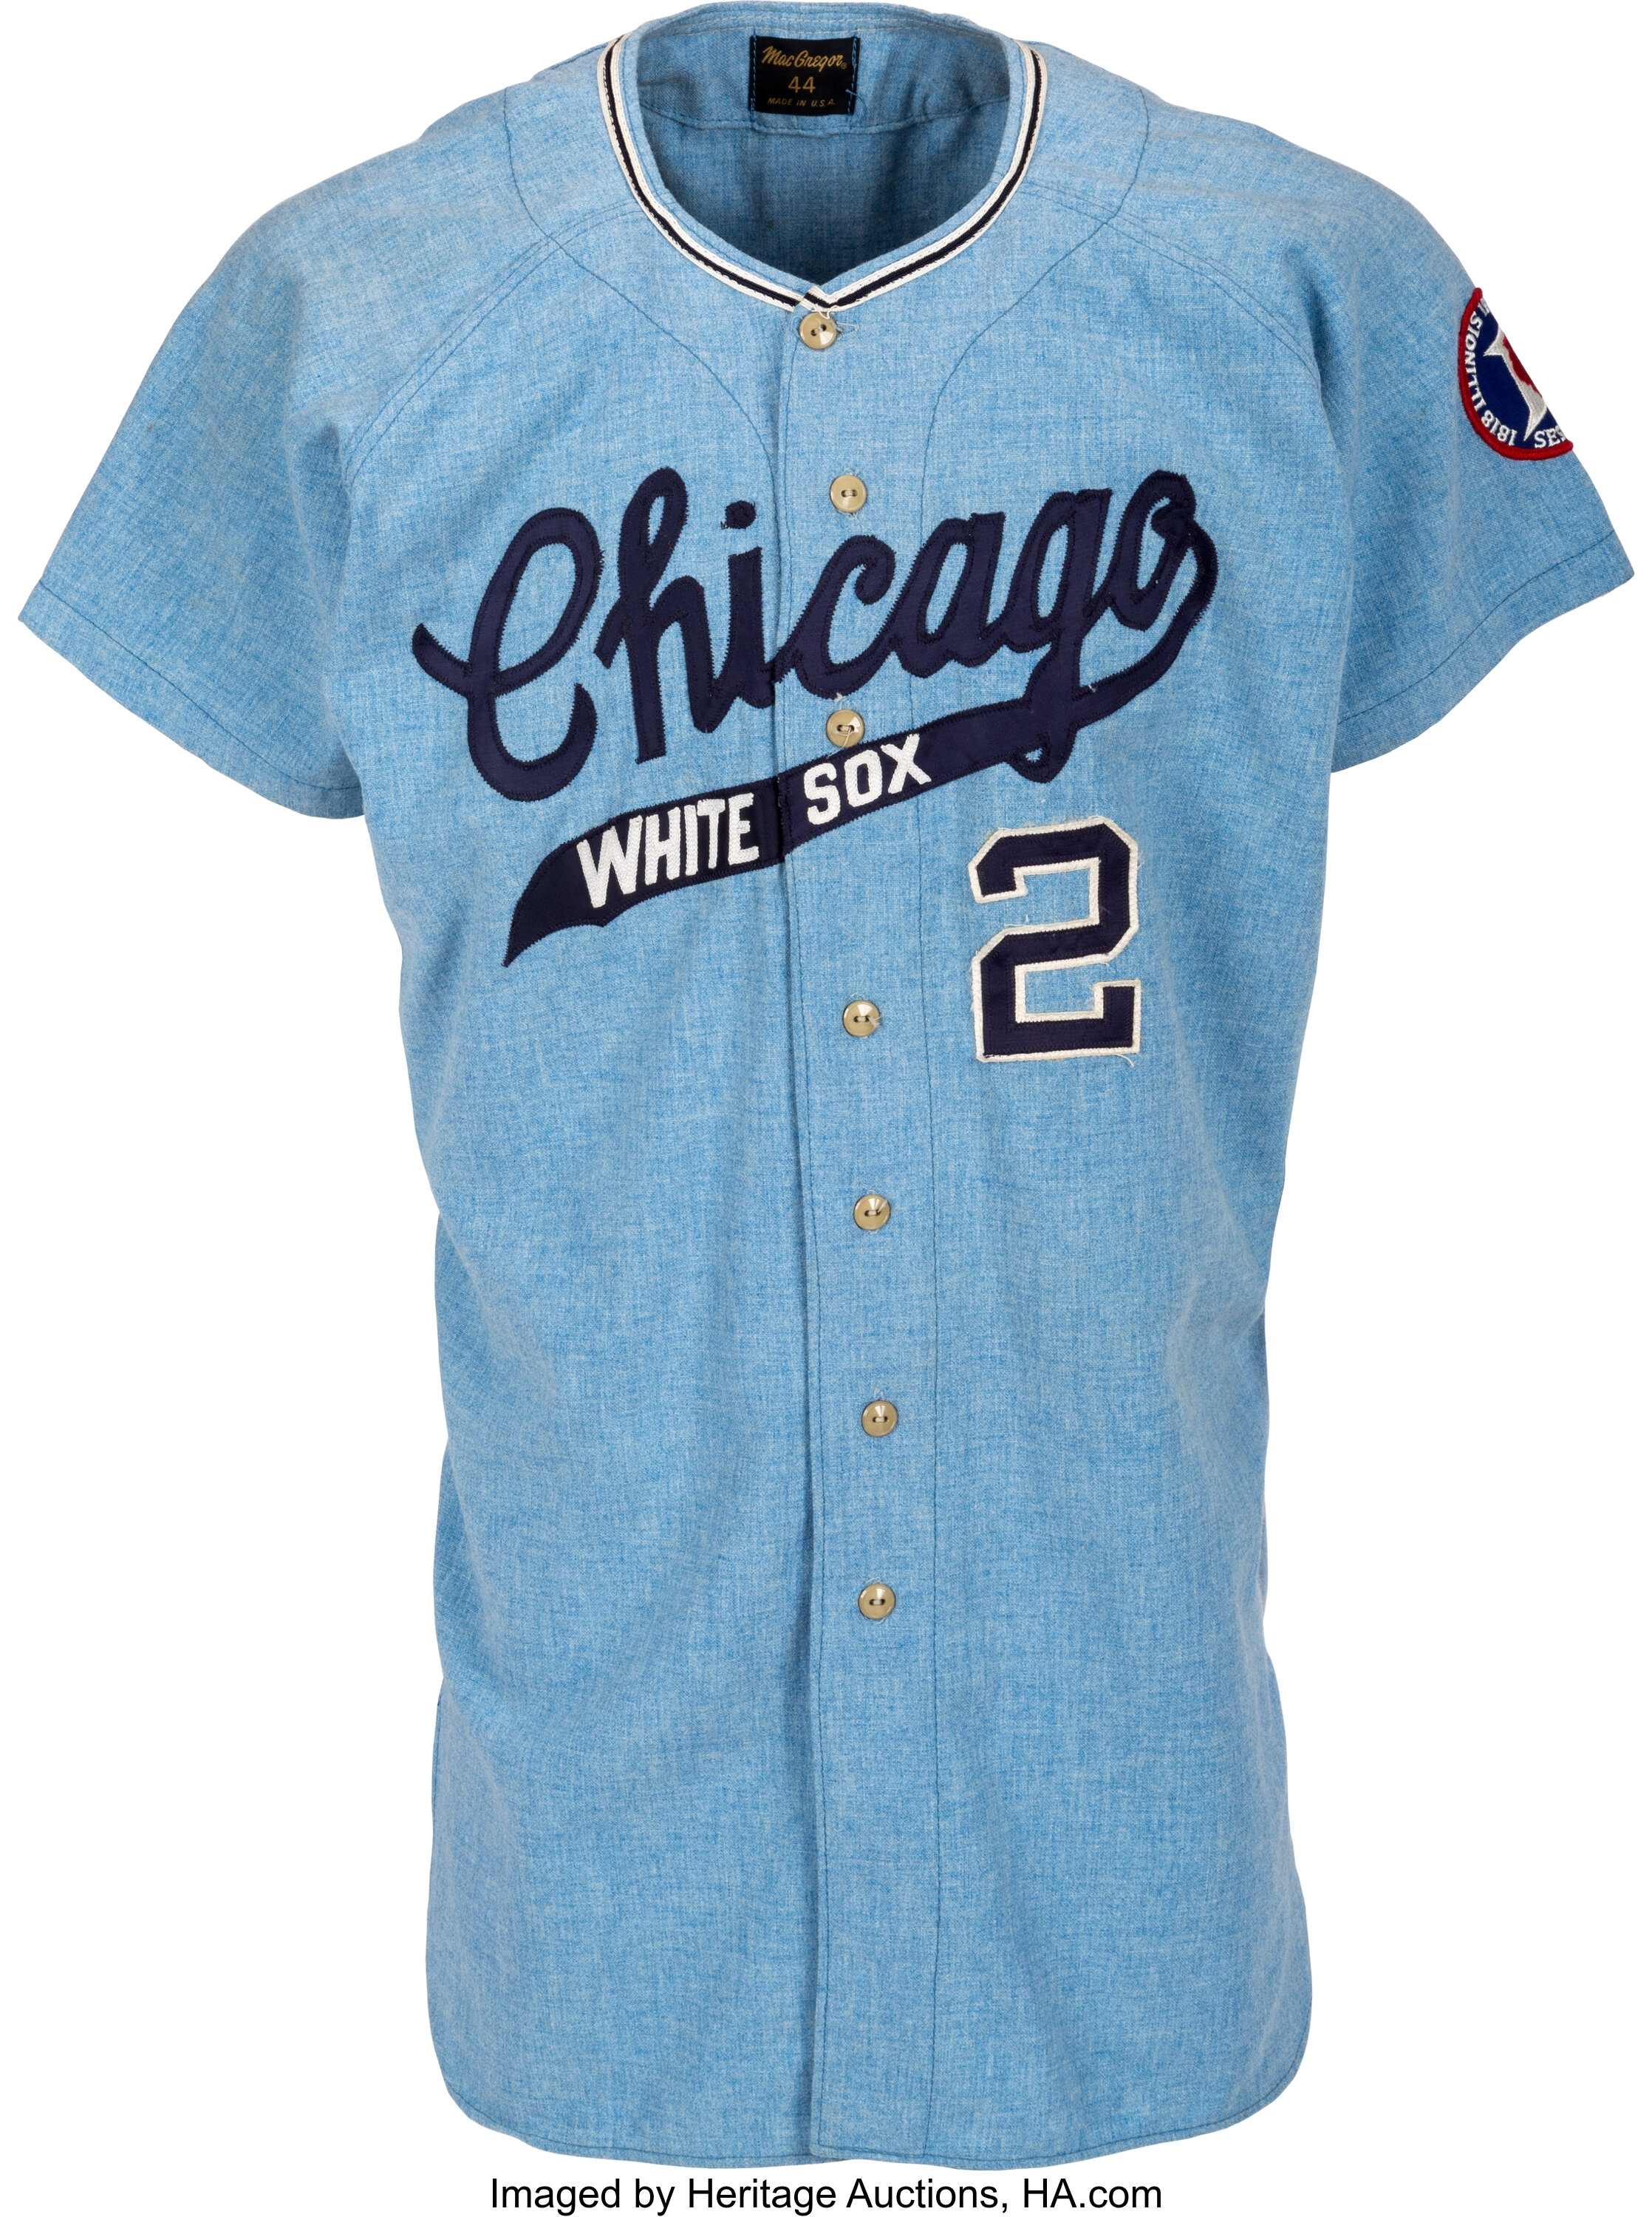 1971-75 Chicago White Sox Away Jersey